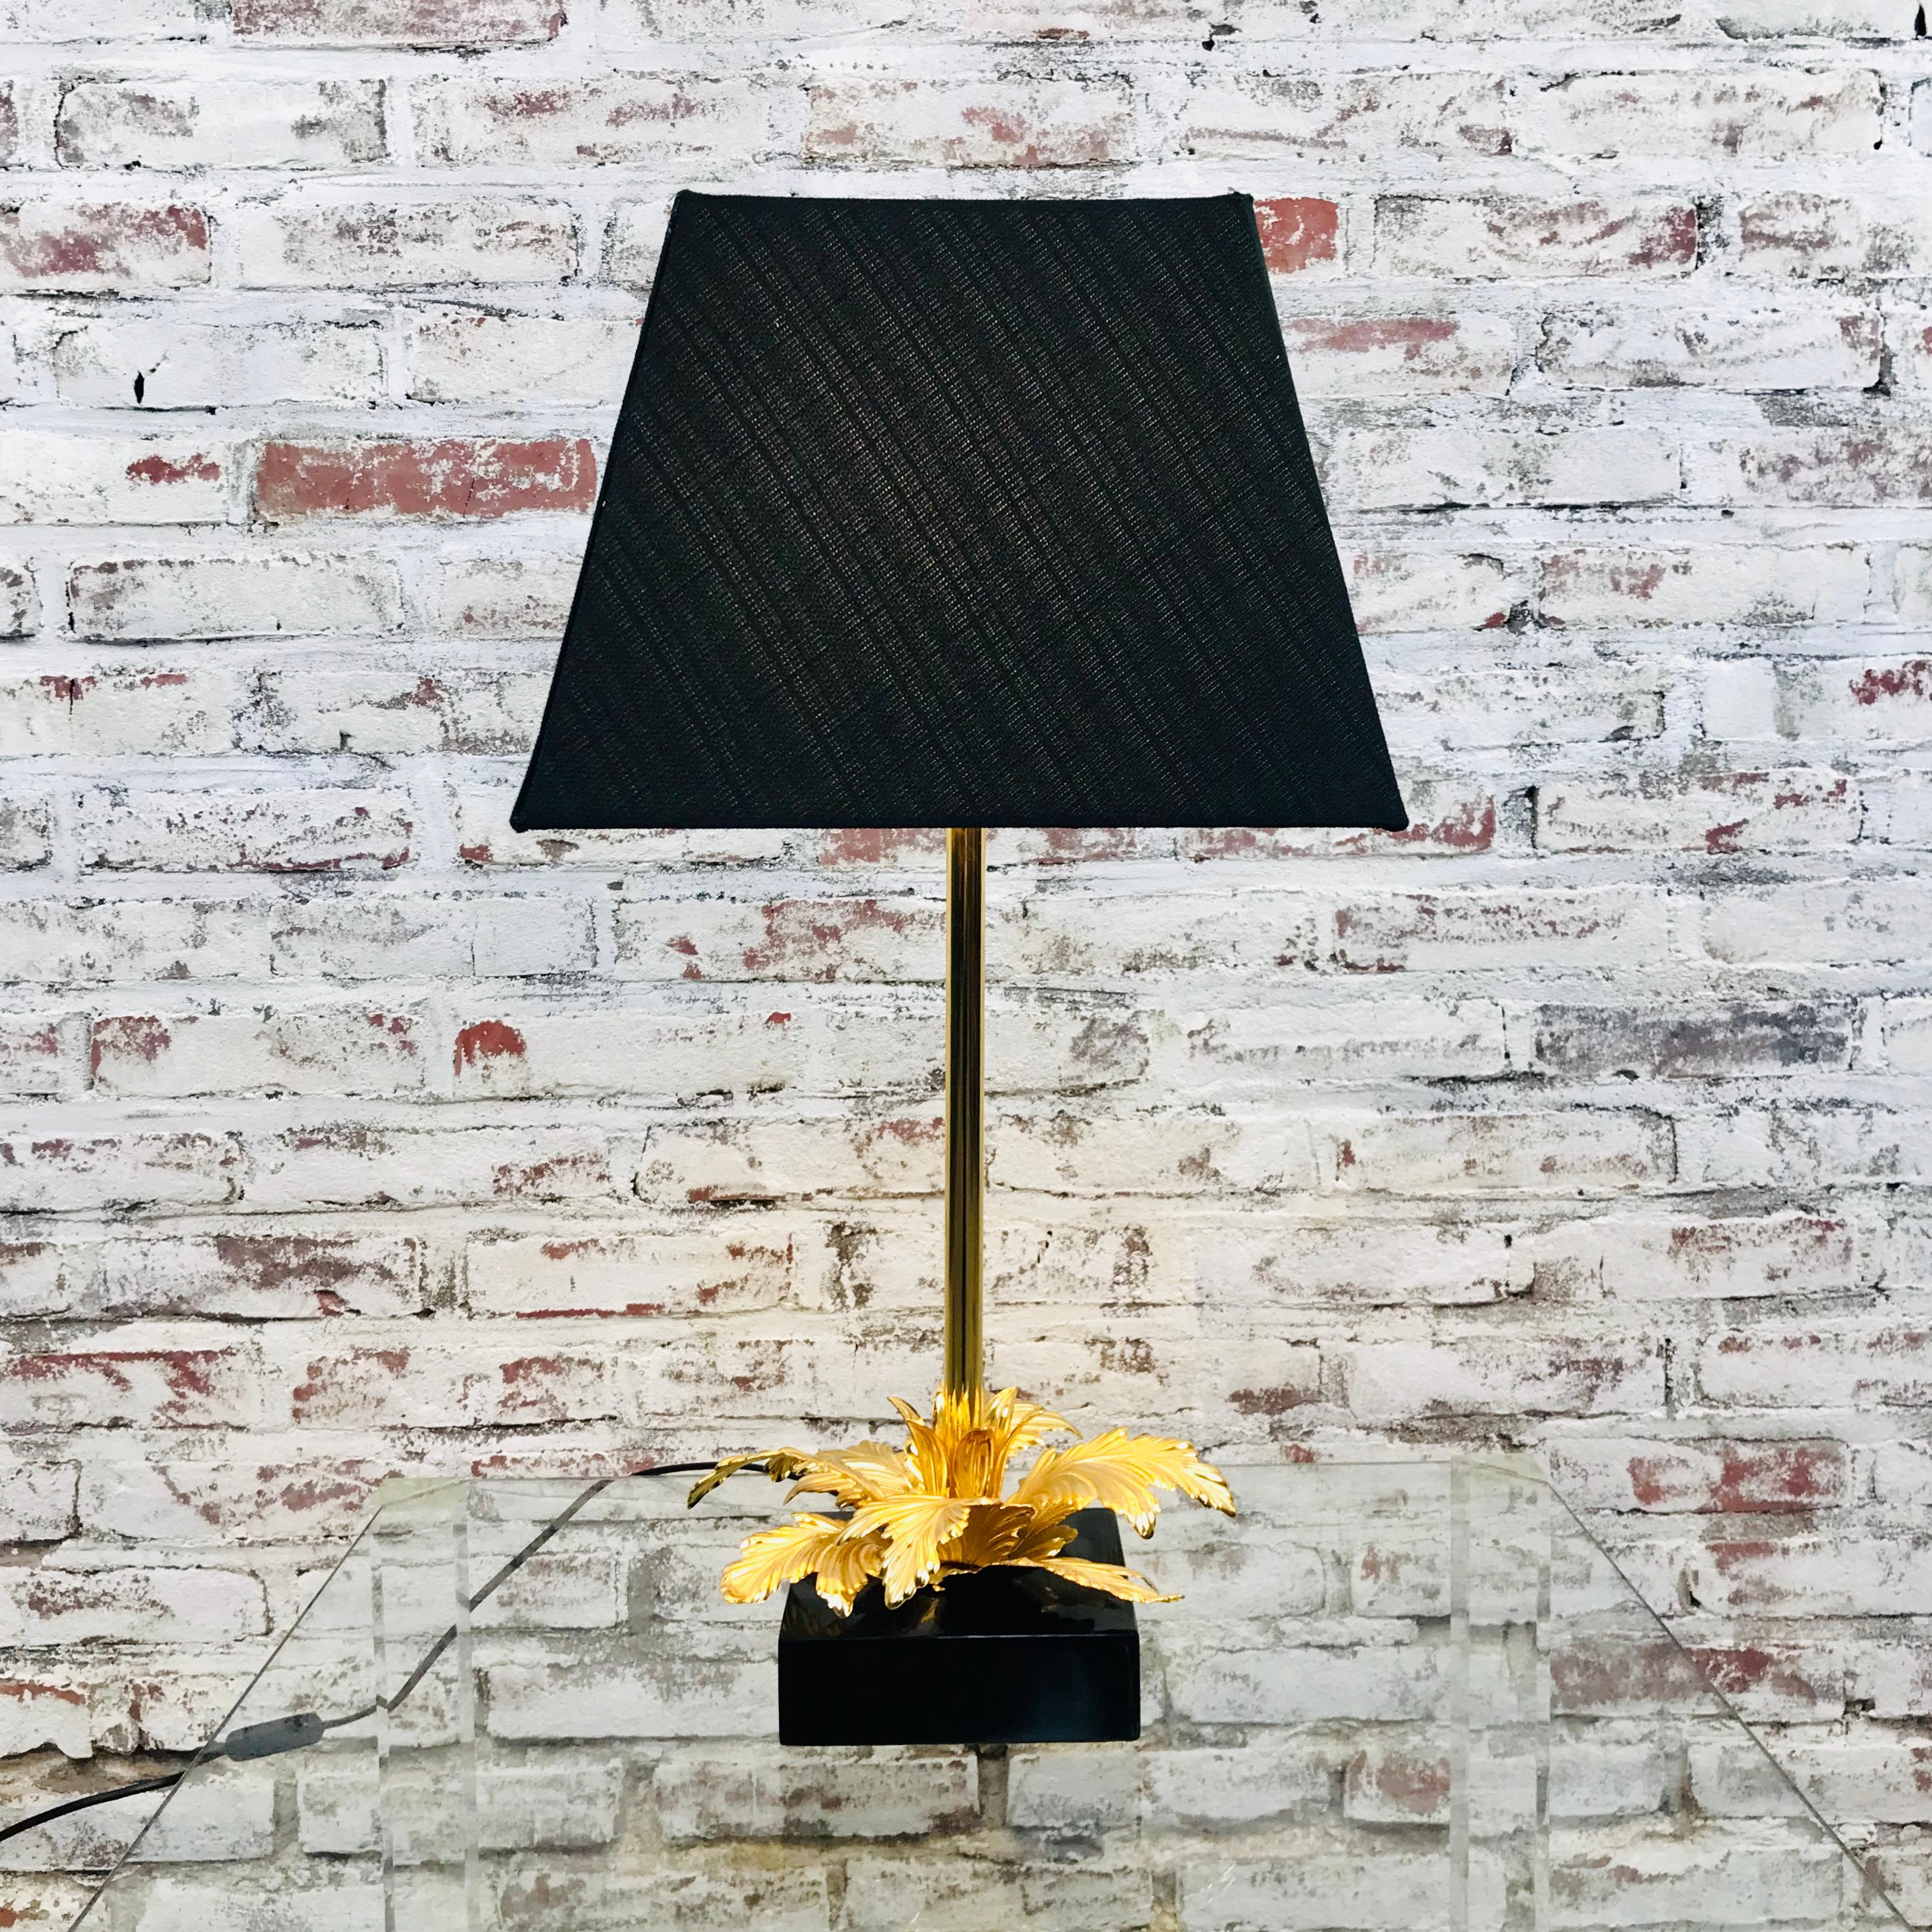 Vintage French Mid-Century Brass and Marble Table Lamp by Maison Jansen, 1970s In Excellent Condition For Sale In Eindhoven, Netherlands